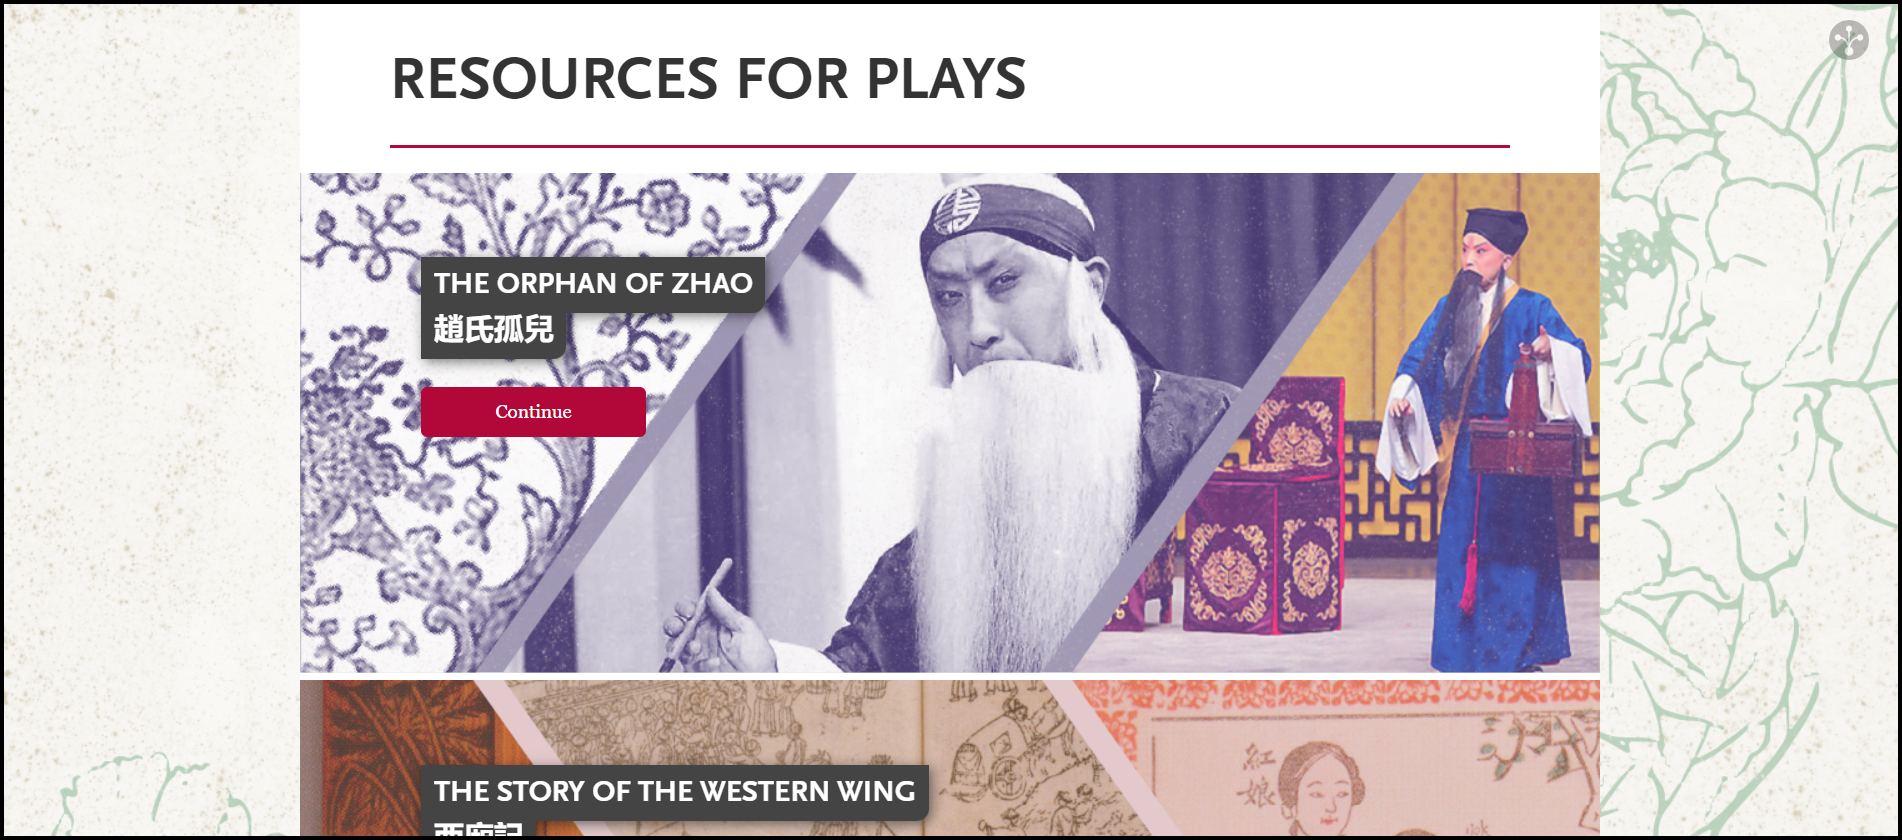 A page of the new Chinese Theater Collaborative website, called Resources for Plays.